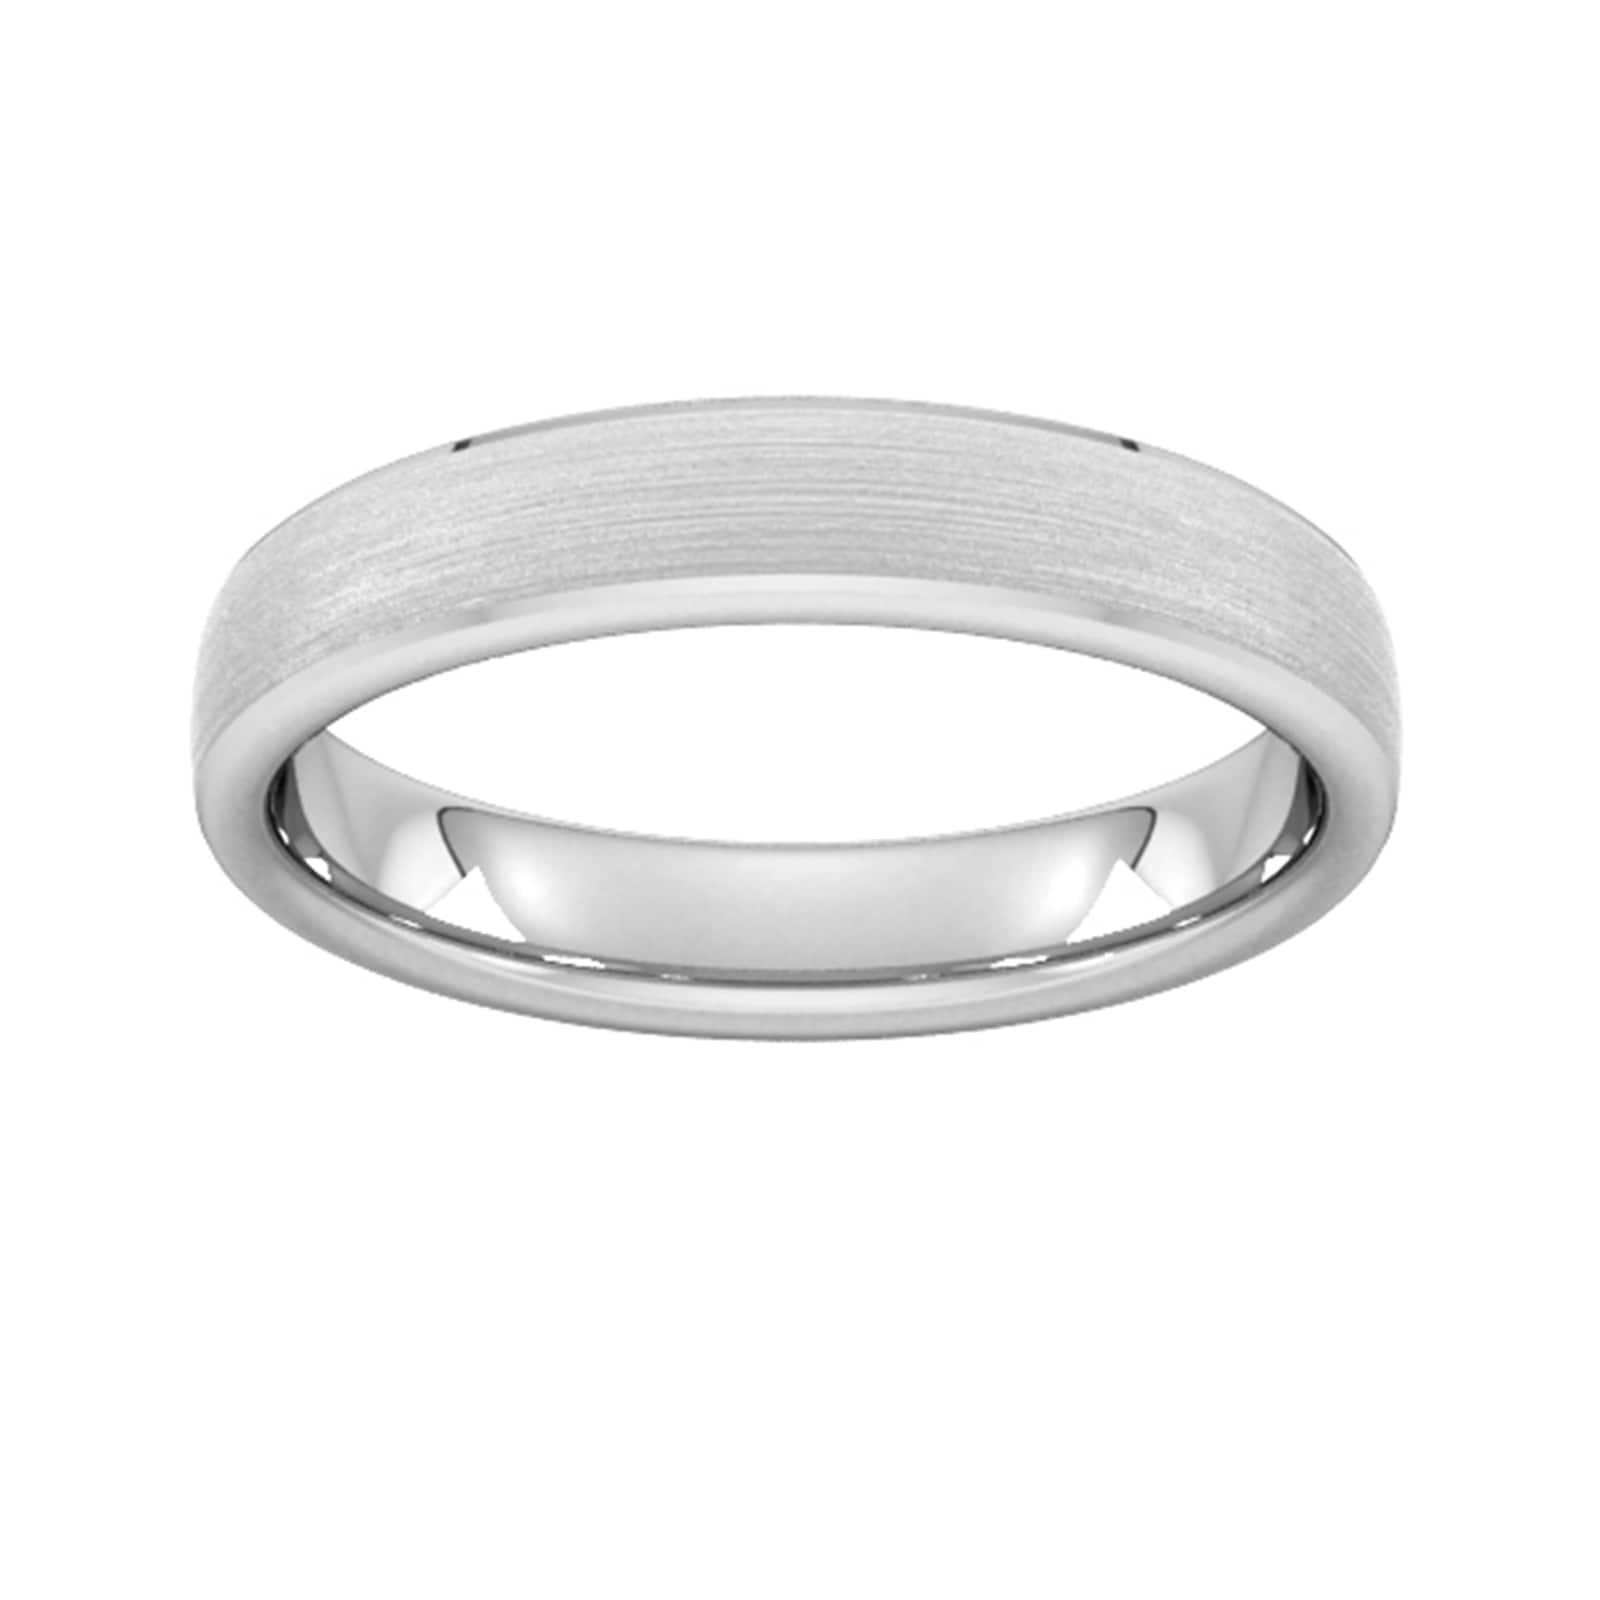 4mm Traditional Court Heavy Polished Chamfered Edges With Matt Centre Wedding Ring In 950 Palladium - Ring Size J